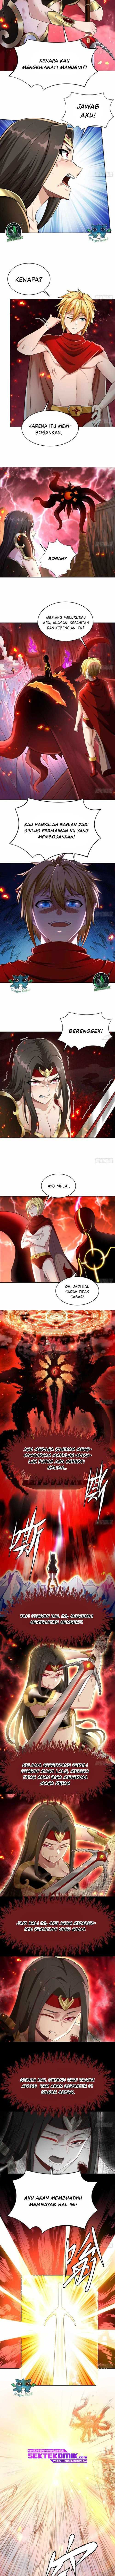 Baca Trapped Inside the Beta Test World for 1000 Years Chapter 2  - GudangKomik